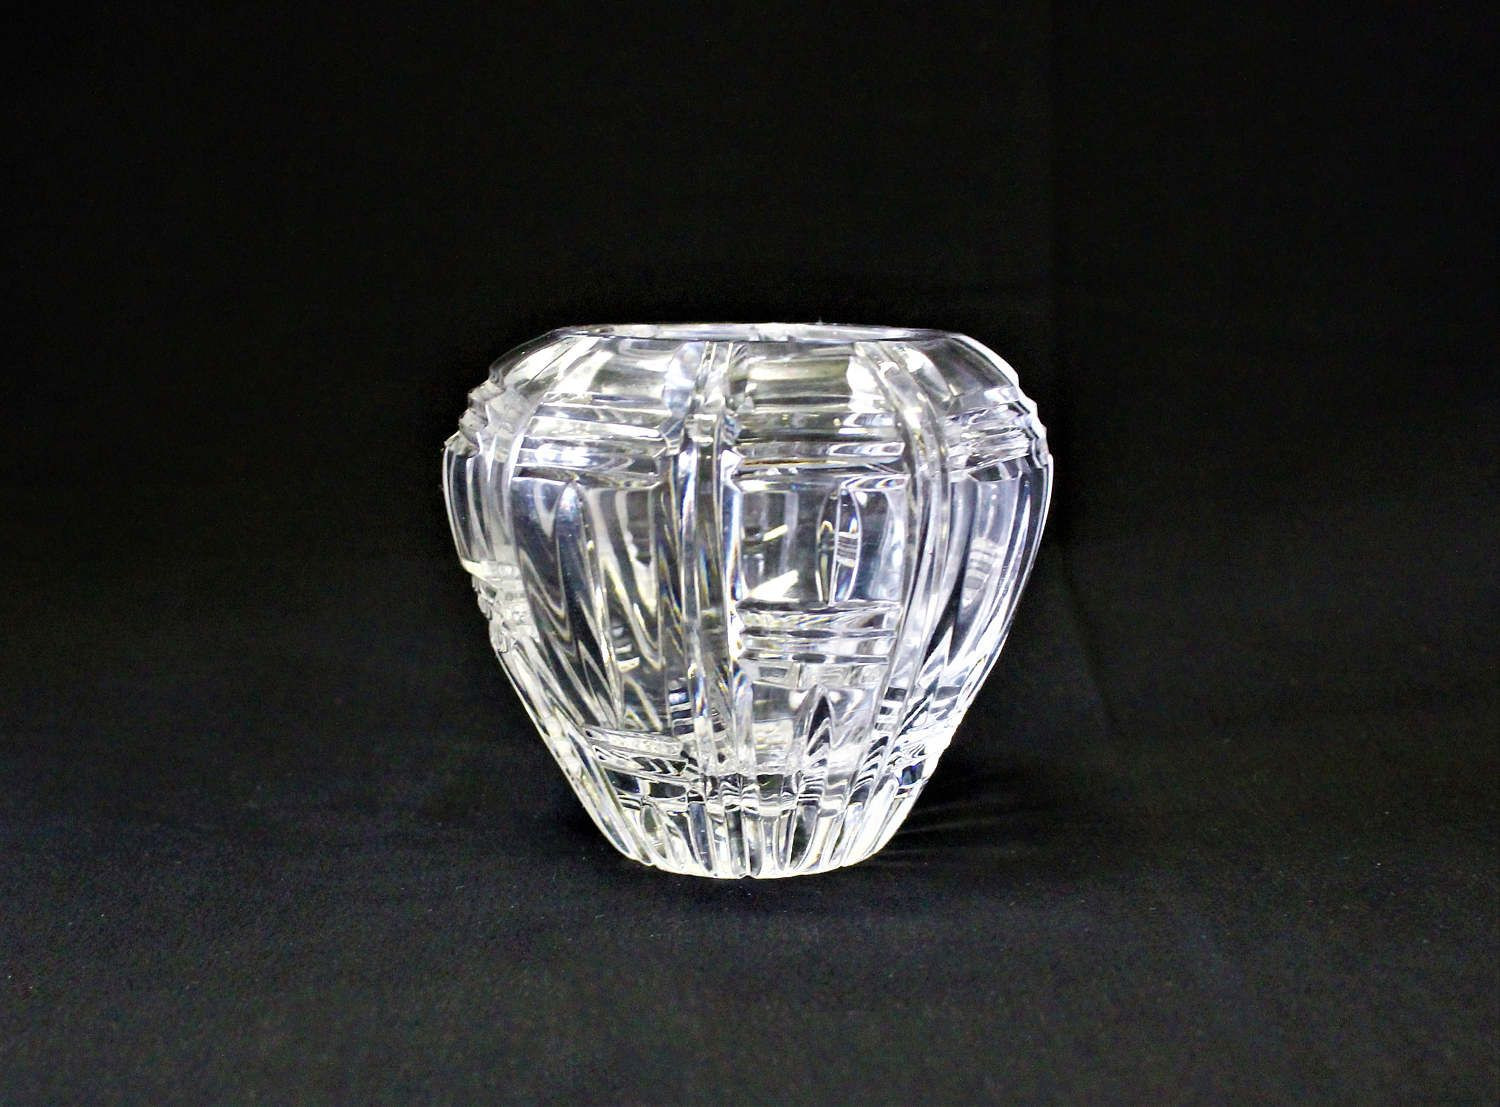 27 Amazing Lenox Small Bud Vase 2024 free download lenox small bud vase of vintage small spherical heavy cut optic lead crystal repetitive with vintage small spherical heavy cut optic lead crystal repetitive geometric design rose or bud vase